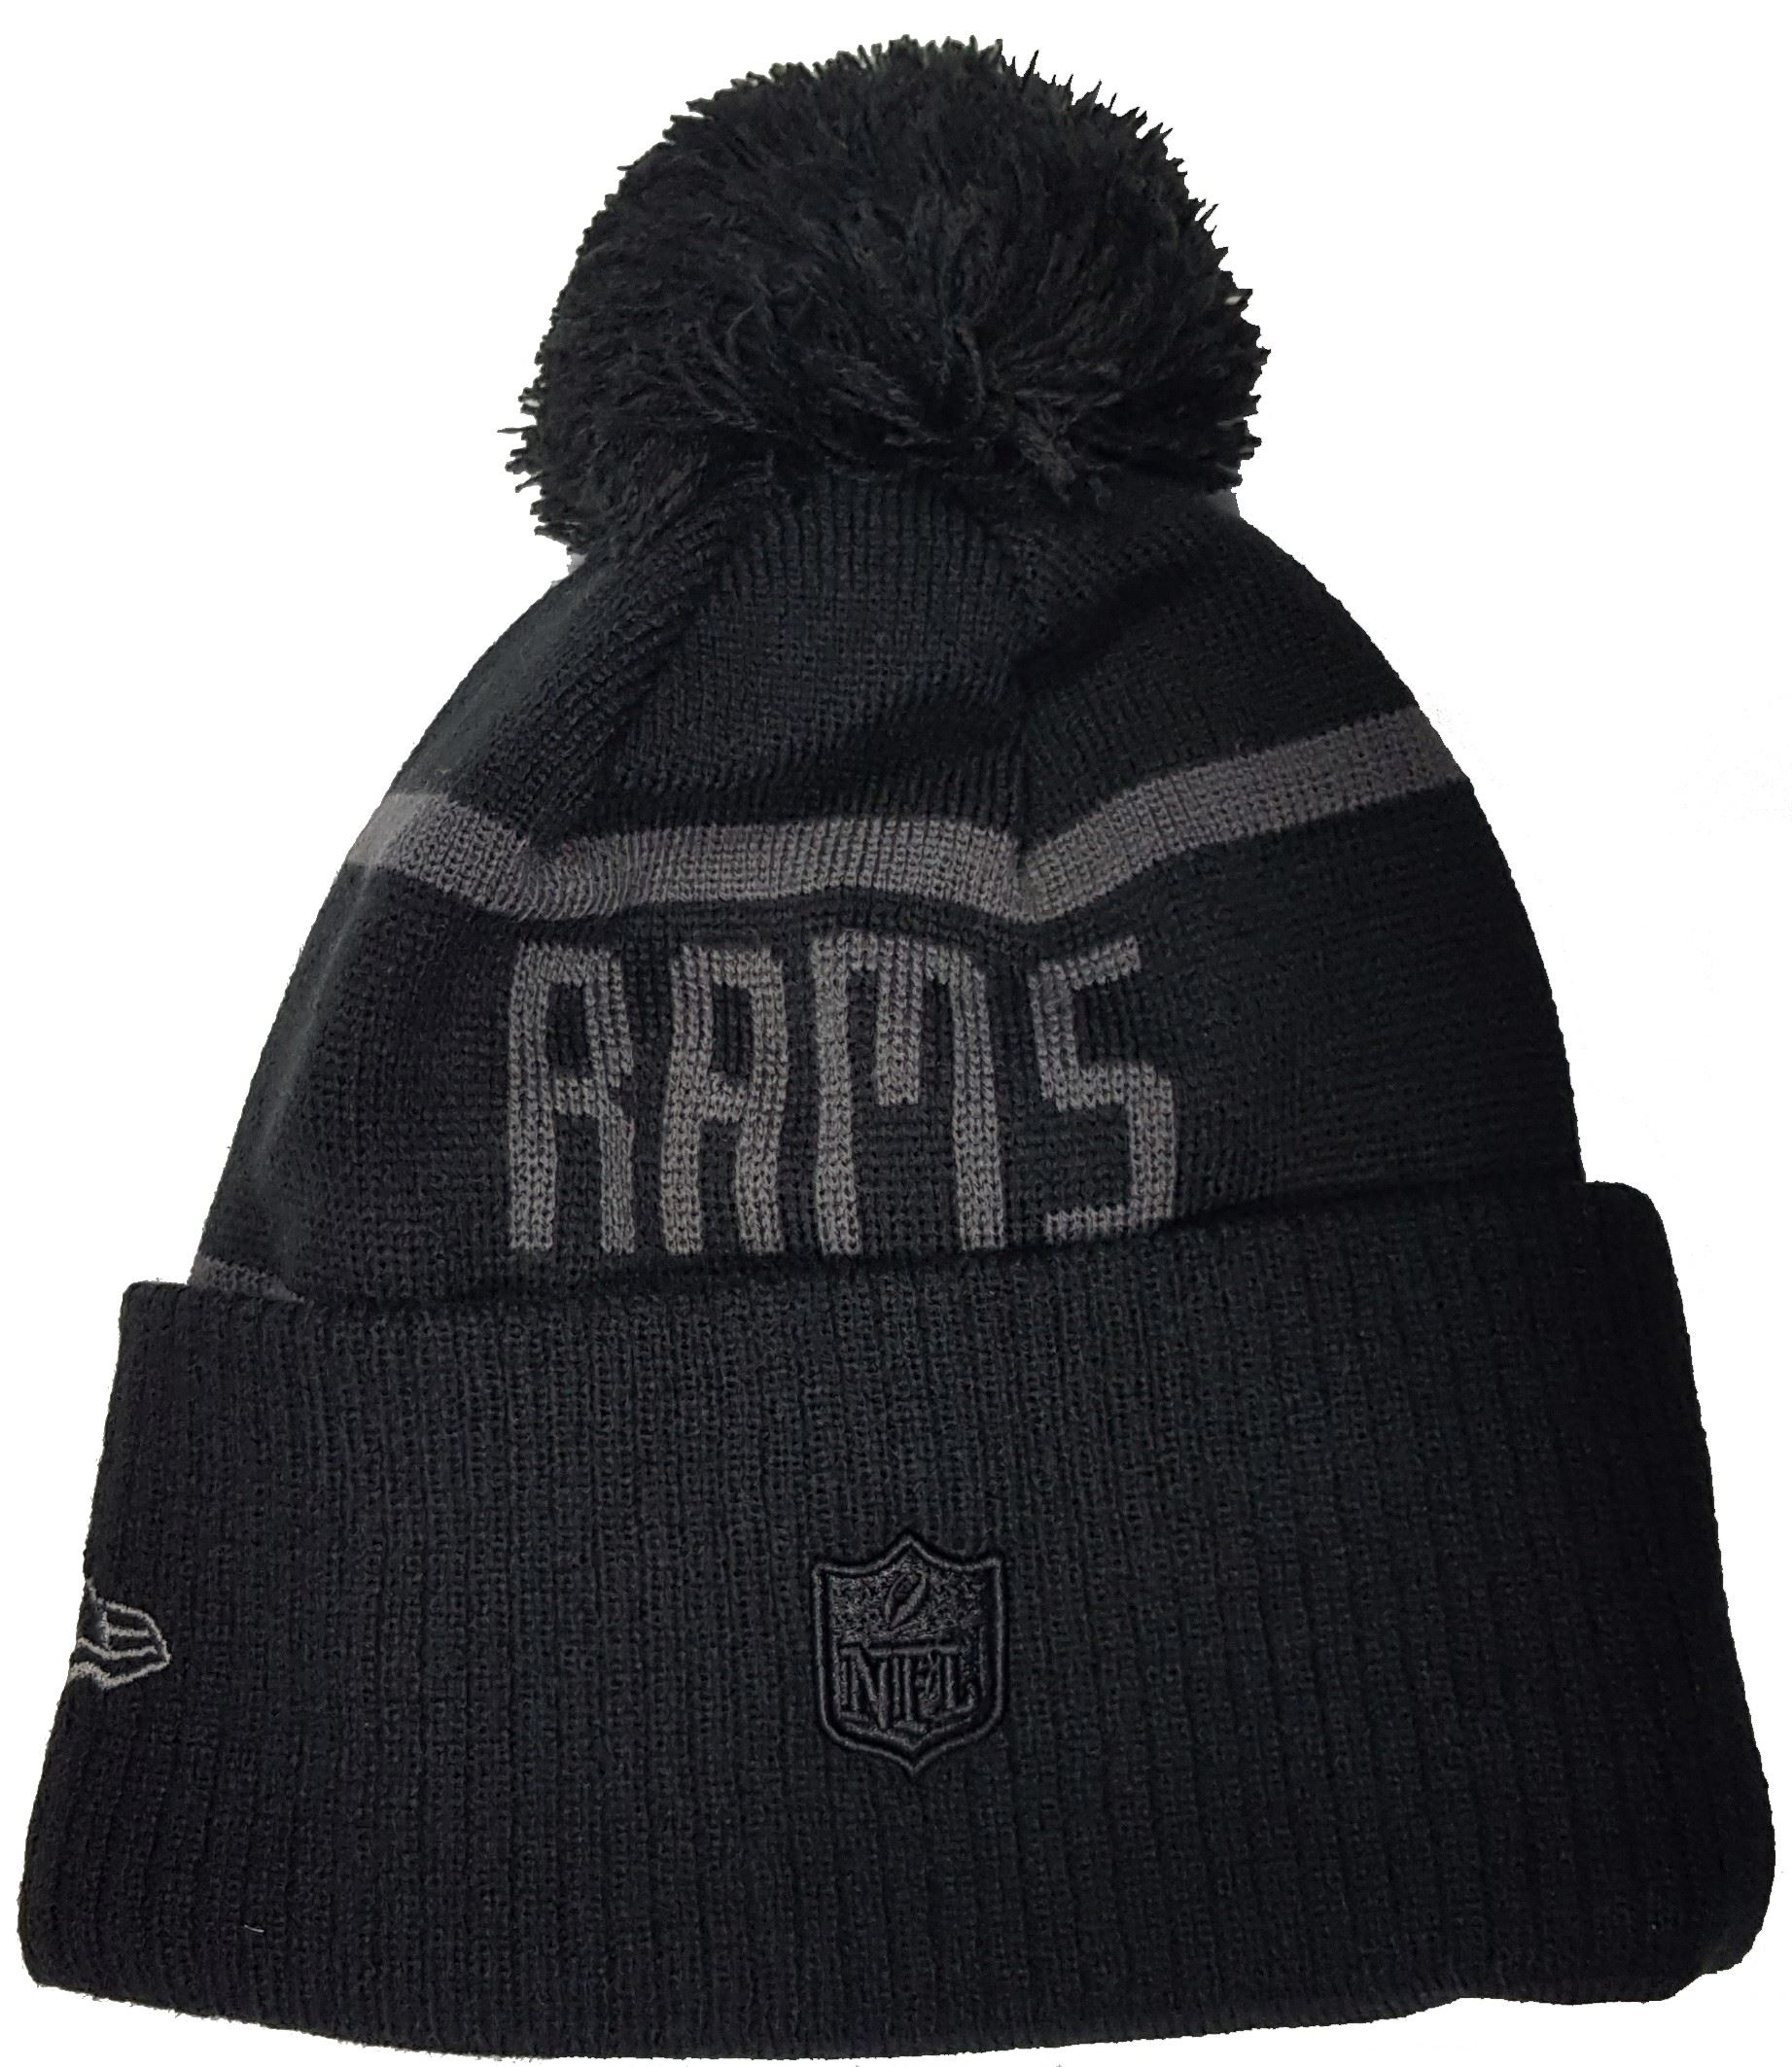 Los Angeles Rams NFL Black Collection Beanie New Era